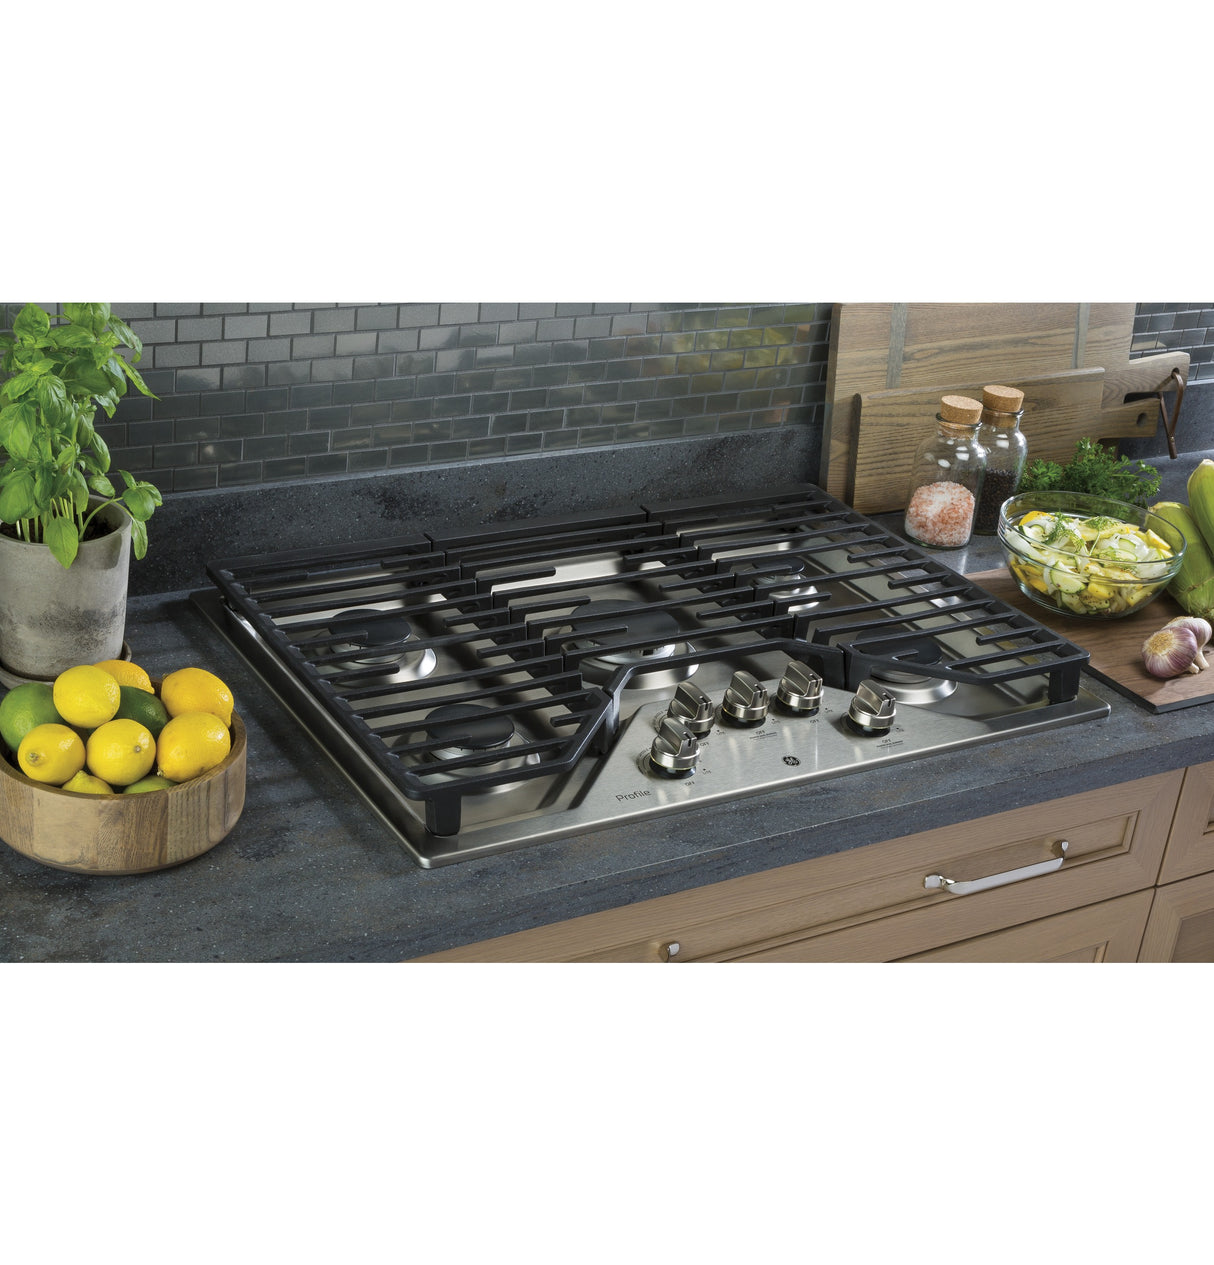 GE Profile(TM) 30" Built-In Gas Cooktop with 5 Burners and an Optional Extra-Large Cast Iron Griddle - (PGP7030SLSS)